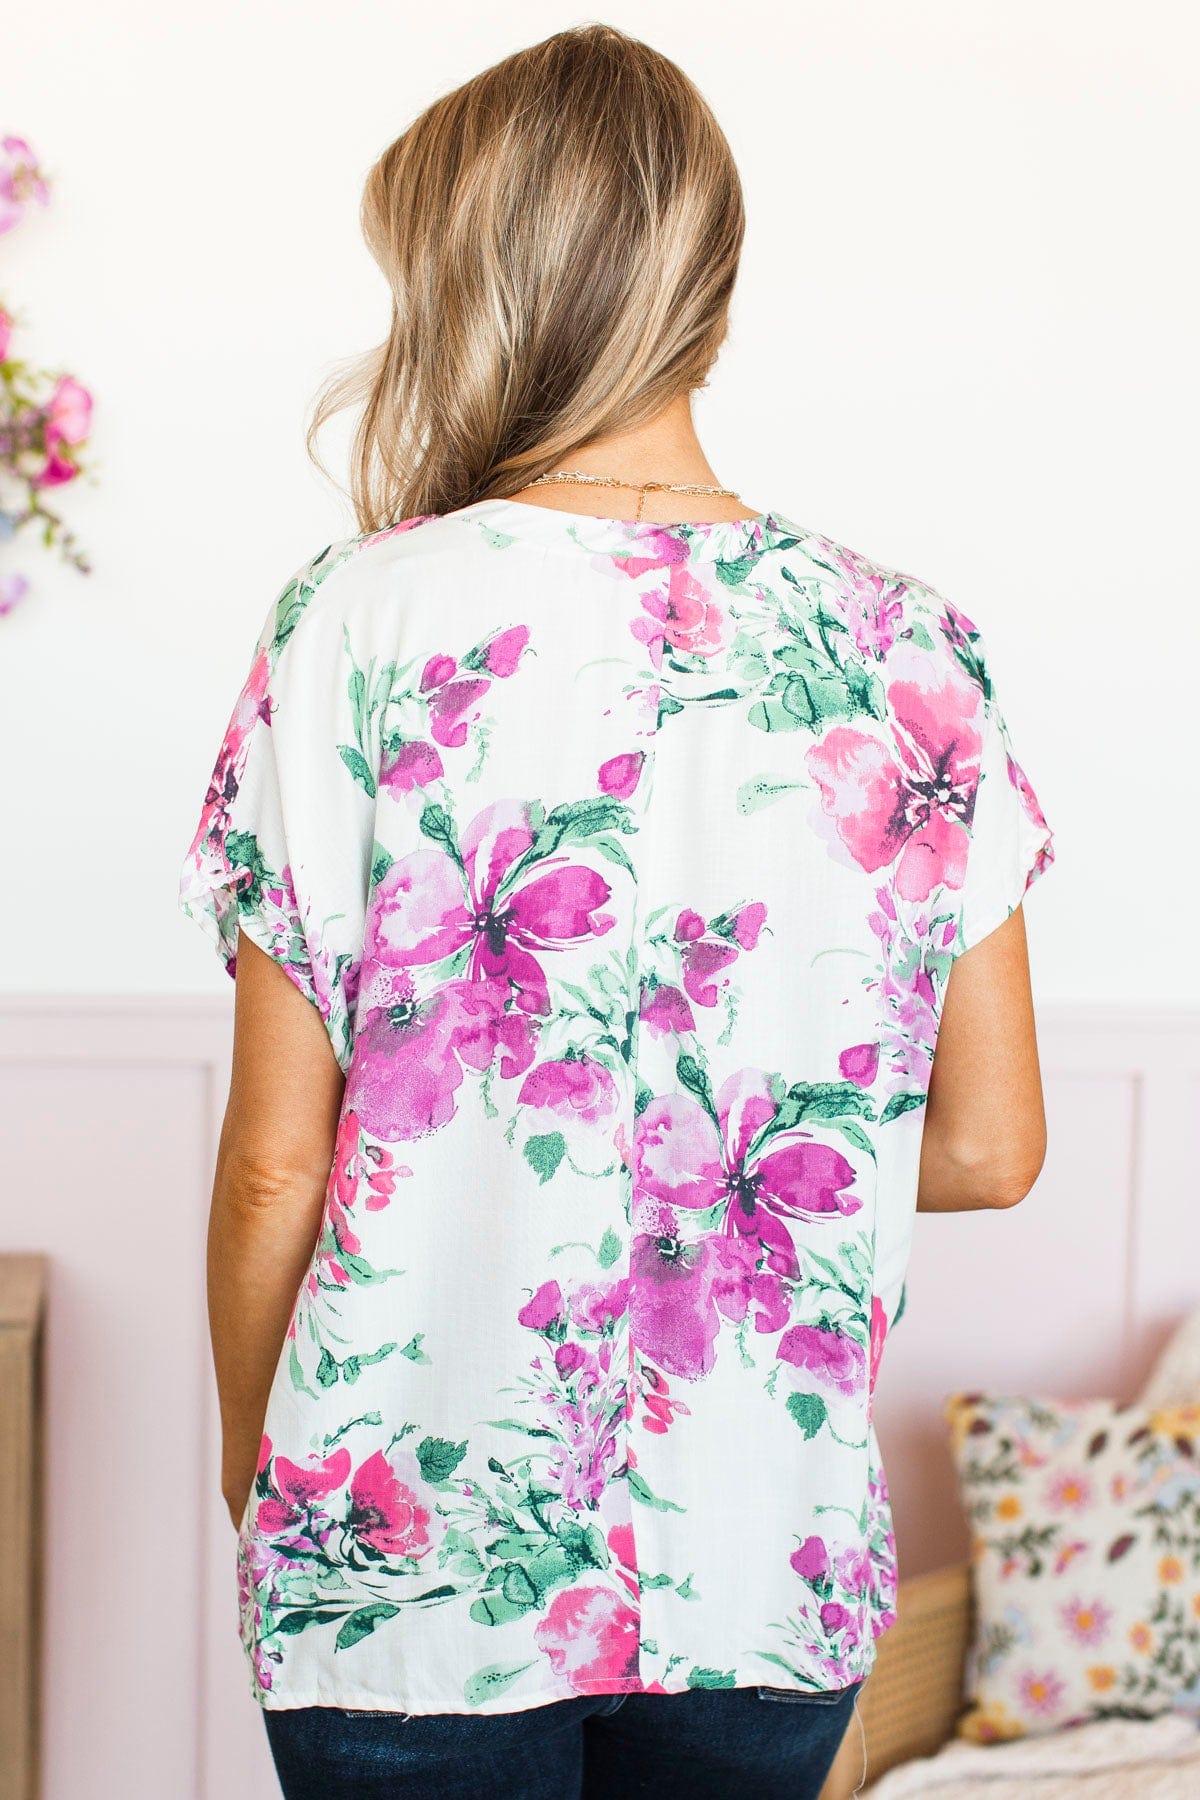 Find Me In The Flowers Top- Ivory